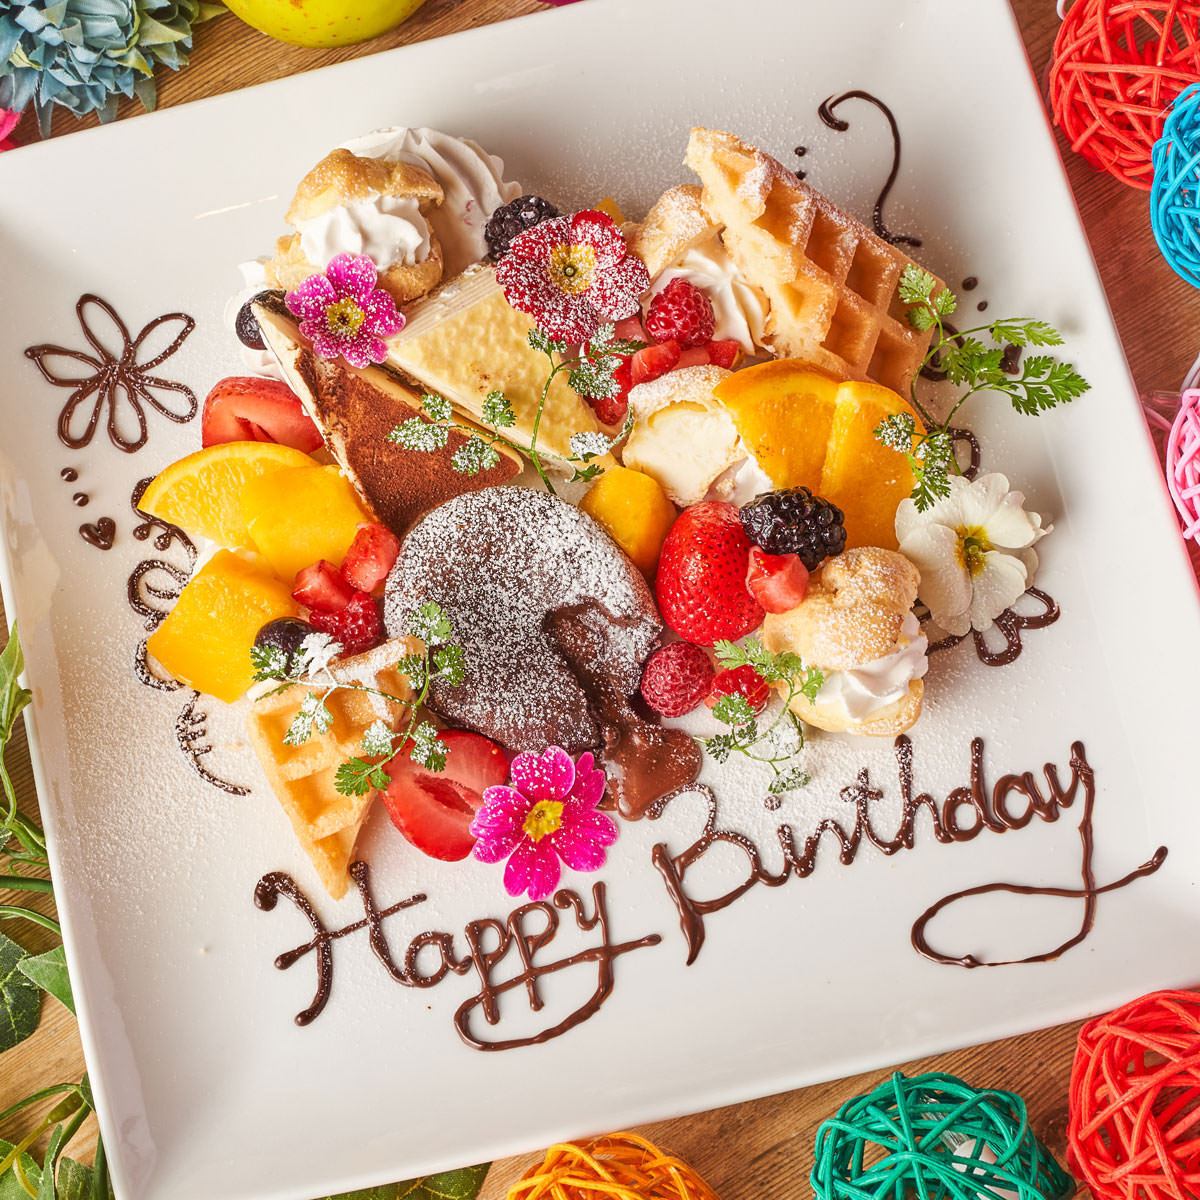 We offer dessert plates perfect for celebrating birthdays and anniversaries.